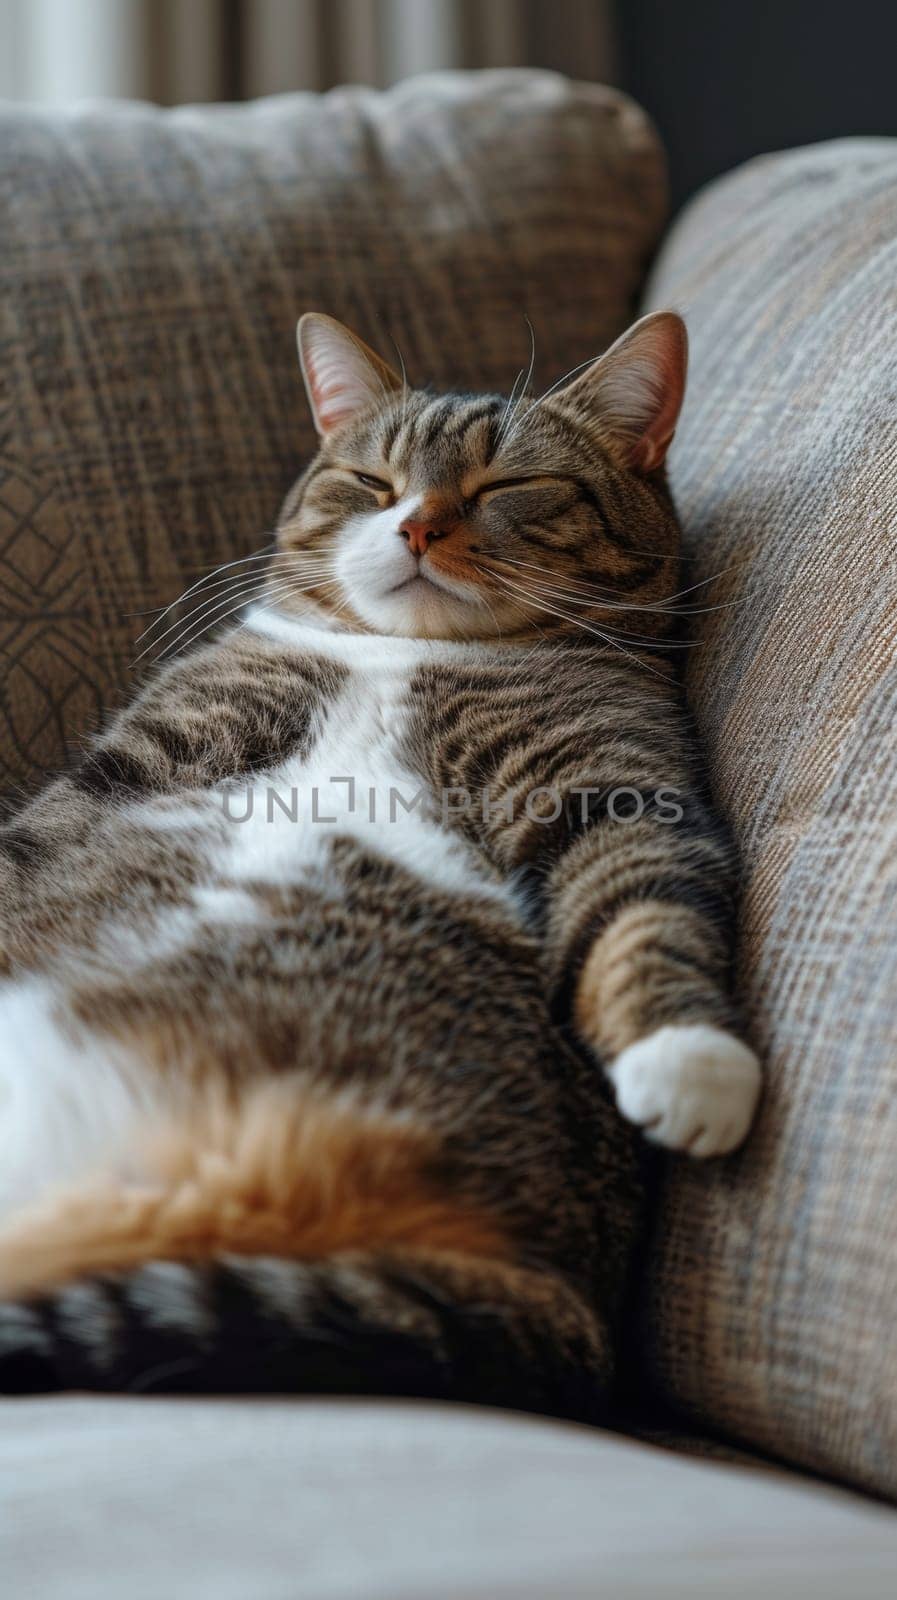 A cat sleeping on a couch with its eyes closed